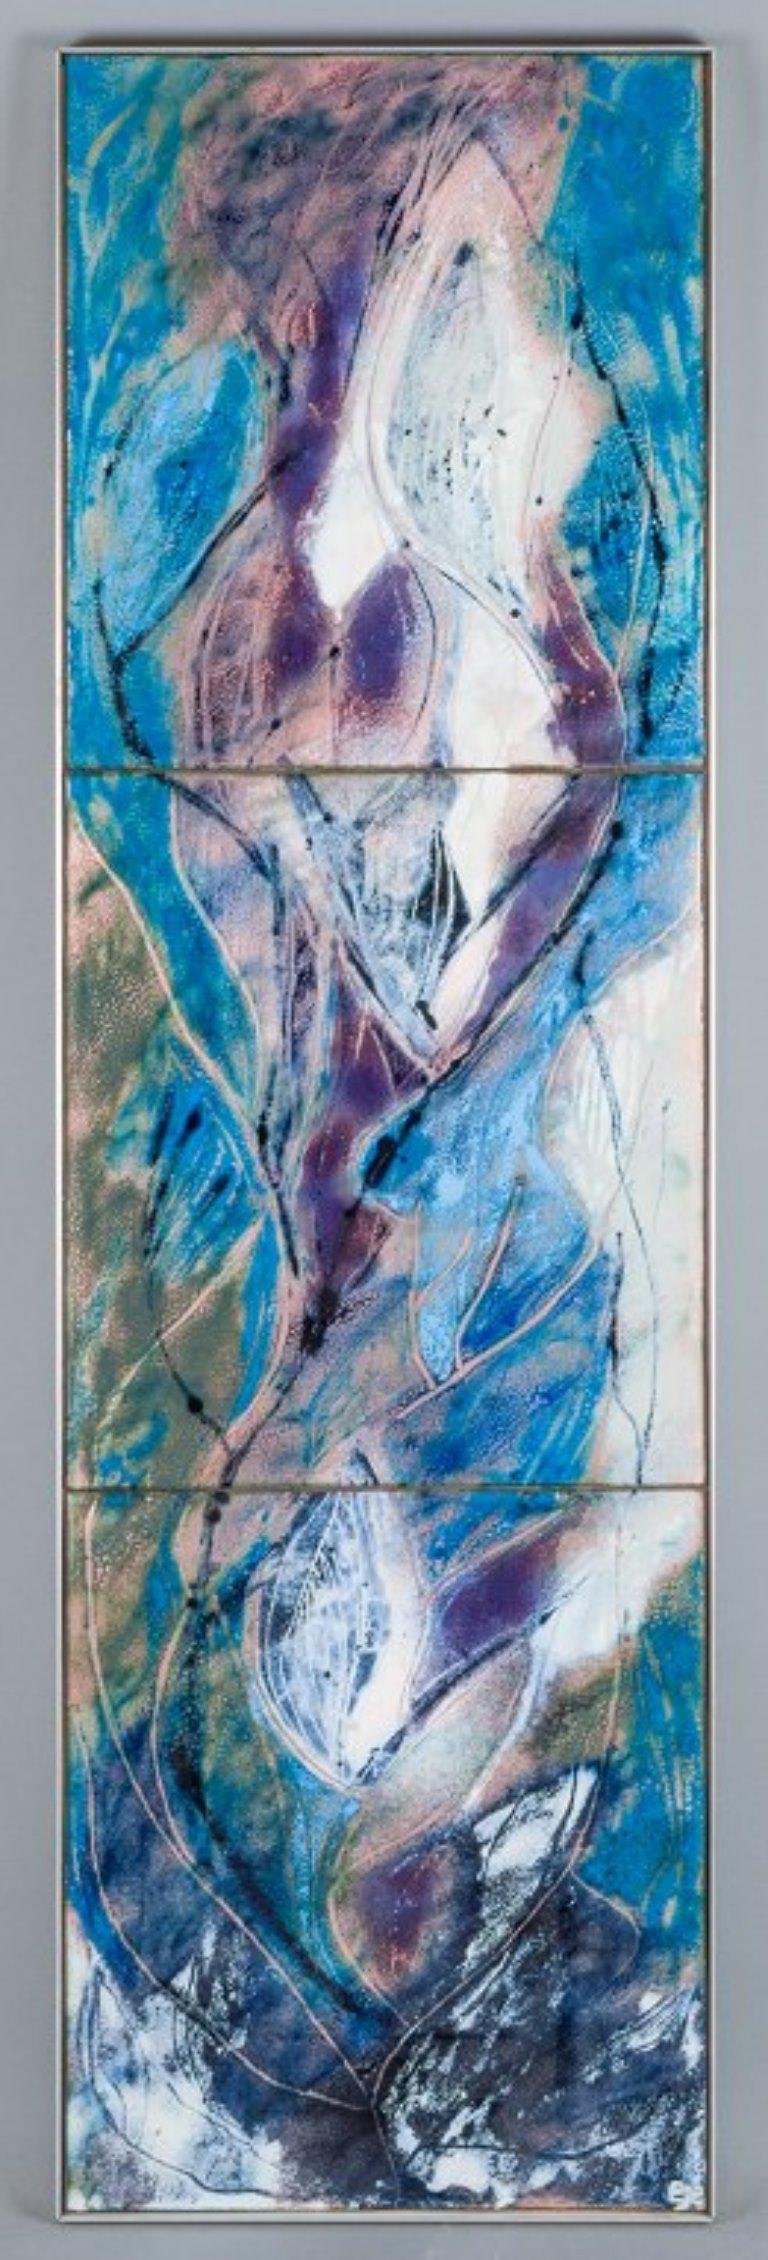 Bodil Eje (1931 - 2006), a listed Danish artist. Triptych abstract composition.
Enamel on metal mounted on board. 
Approximately from the 1960s.
Signed Eje.
Perfect condition.
Total dimensions: W 31.0 cm x H 102.0 cm.